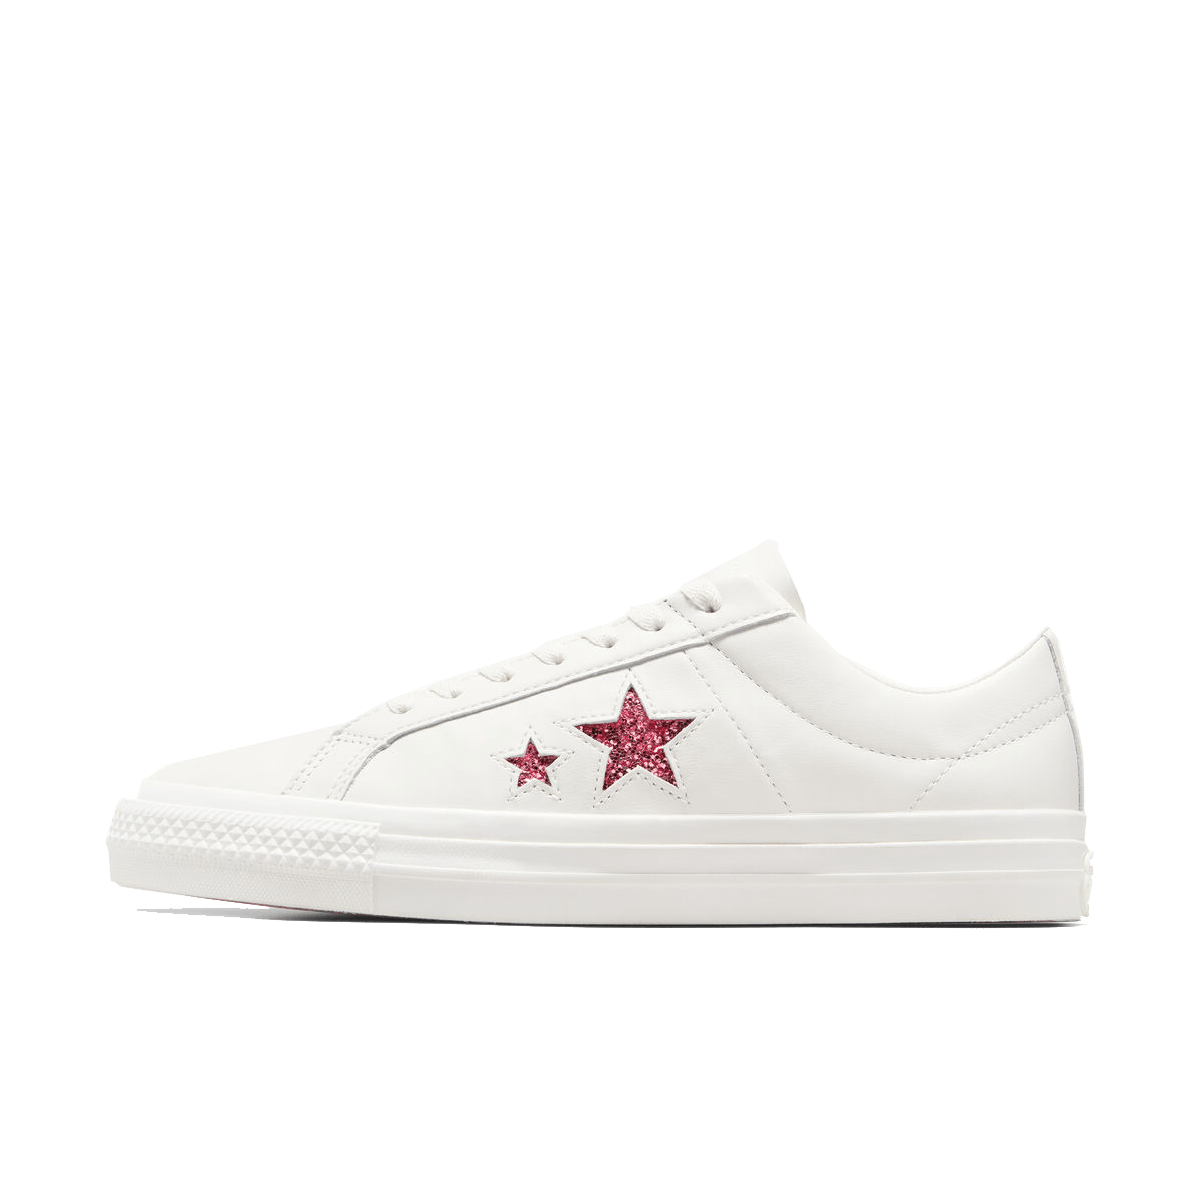 Turnstile x Converse One Star Pro 'Only One Star'